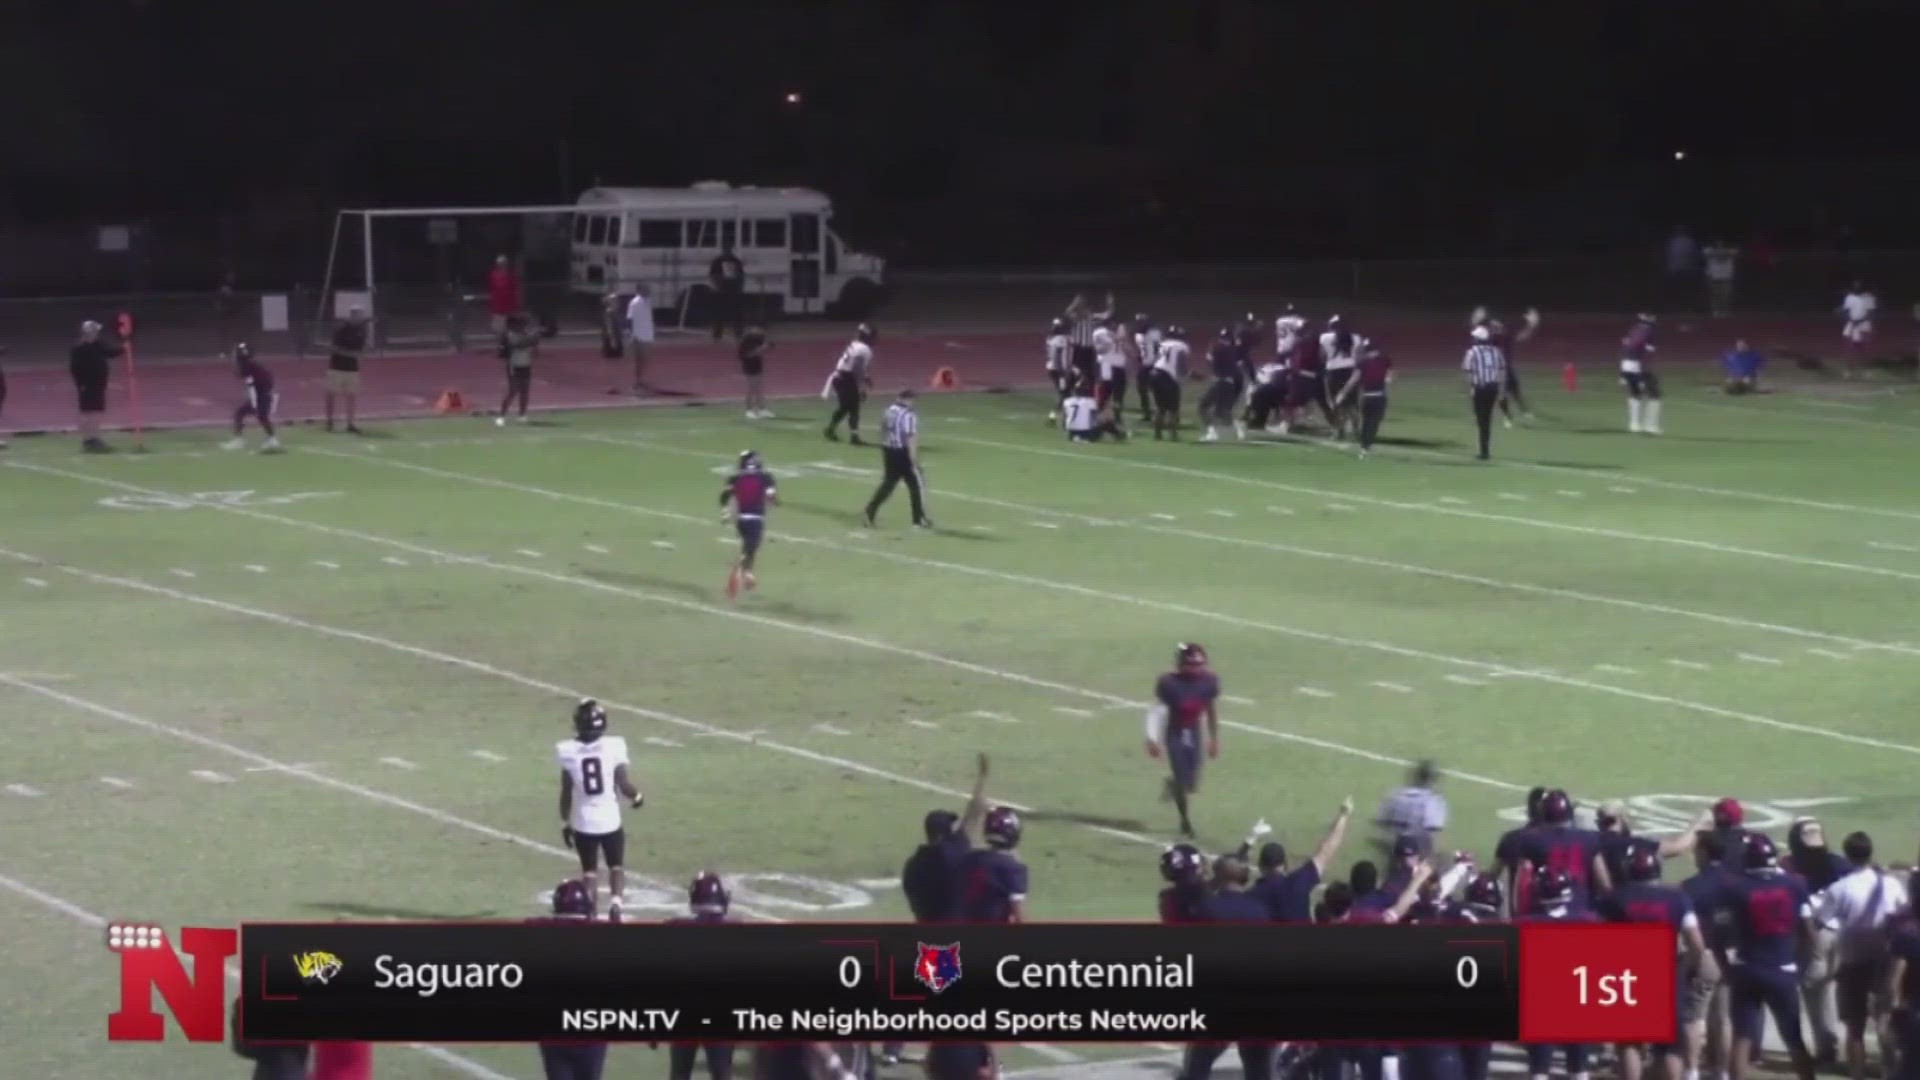 Centennial stayed undefeated with a win over Saguaro, 31-17, in the 12News Streaming Game of the Week